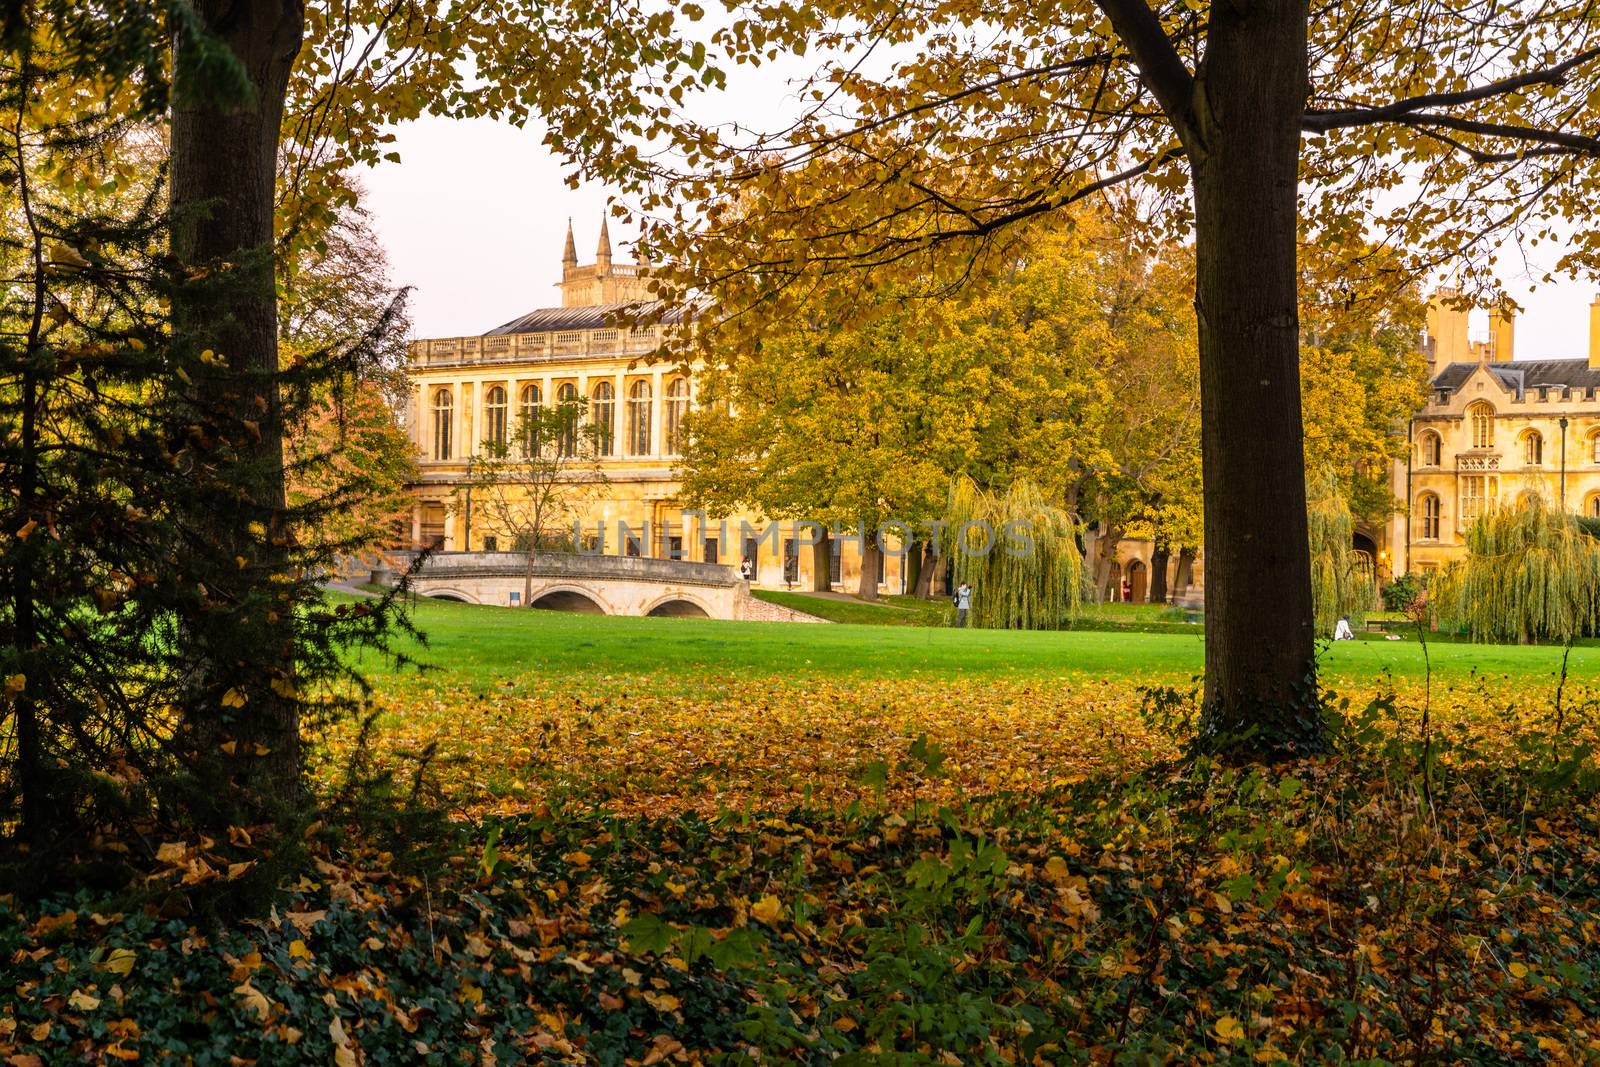 Garden at the back of Trinity College in autumn, Cambridge, UK by mauricallari